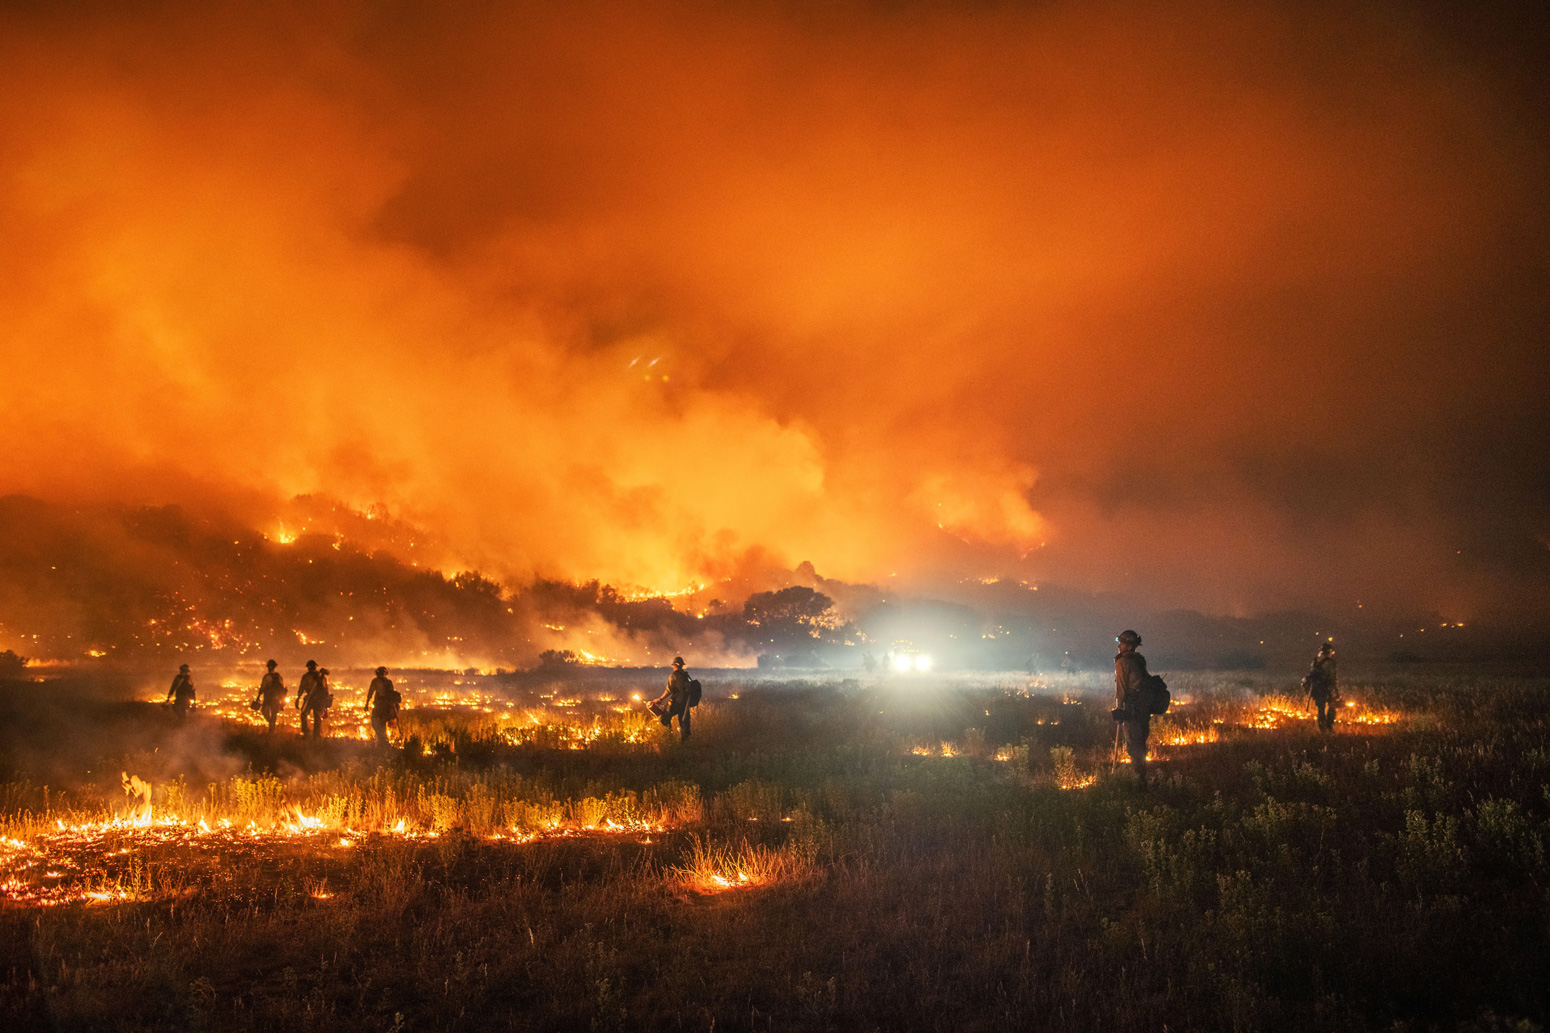 Wyoming-Hotshots-during-night-operations-at-the-Pine-Gulch-fire-Colorado-August-2020-